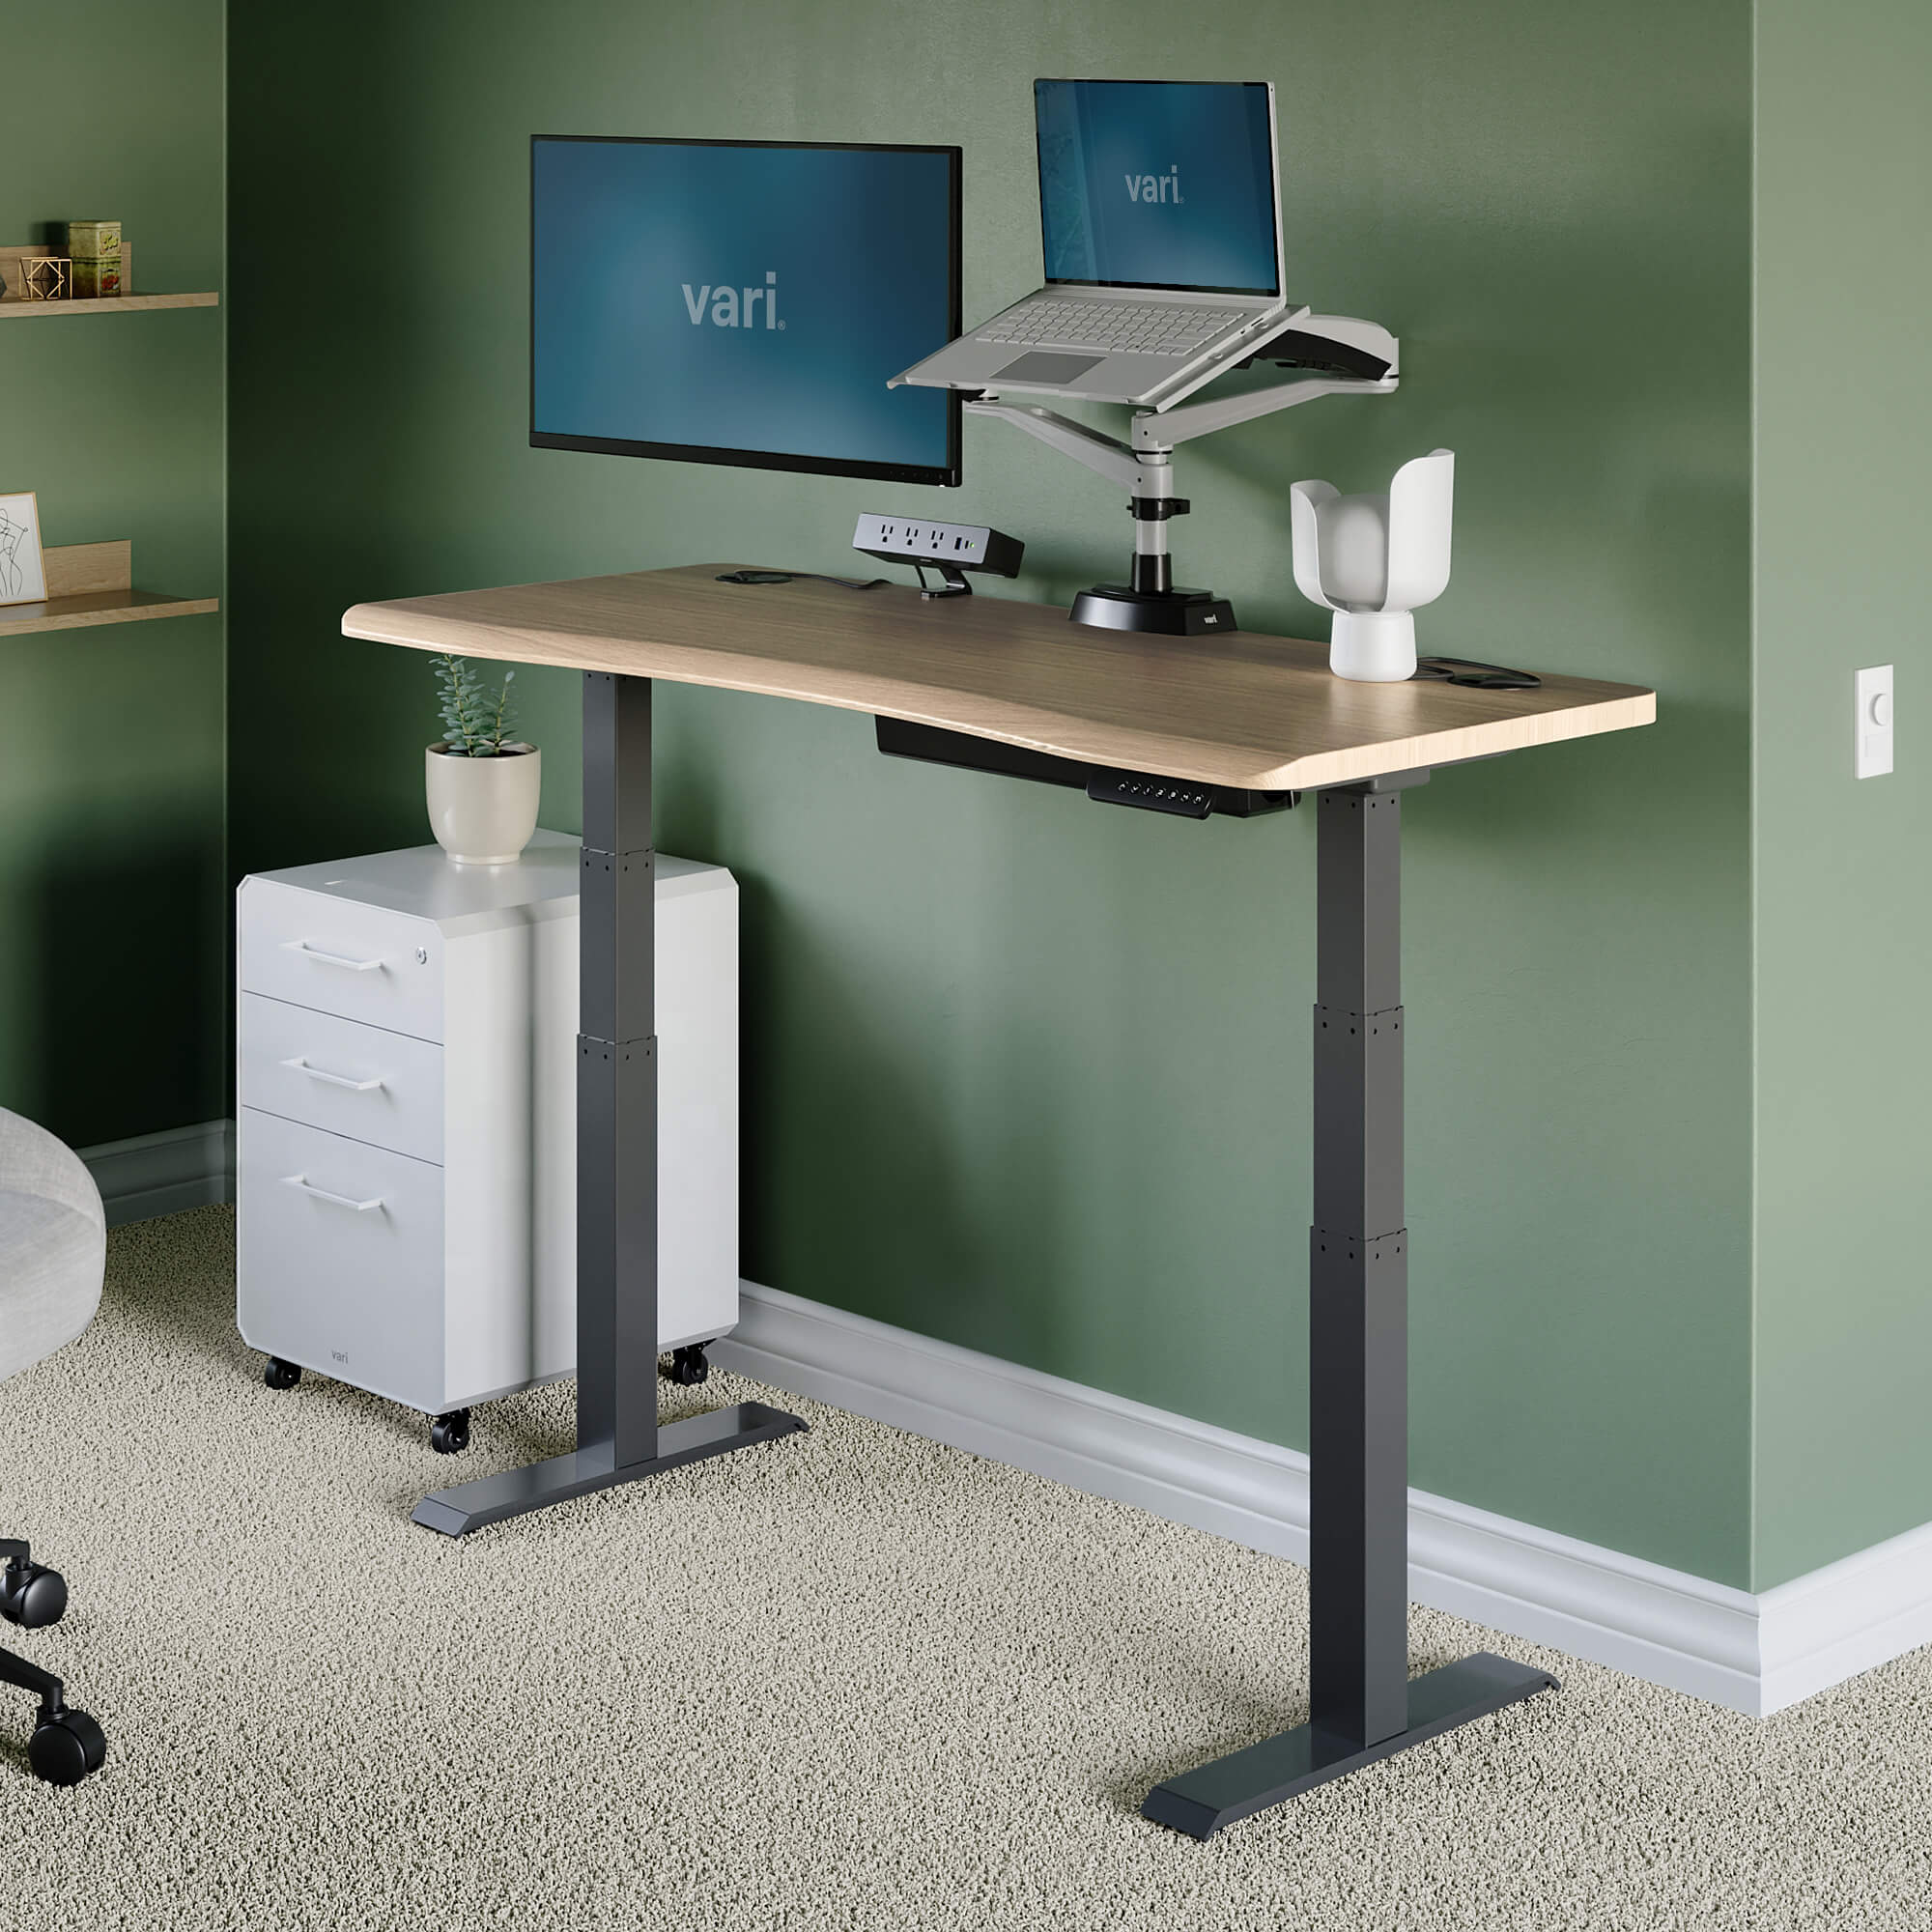 Must-Have Standing Desk Accessories to Support your Feet